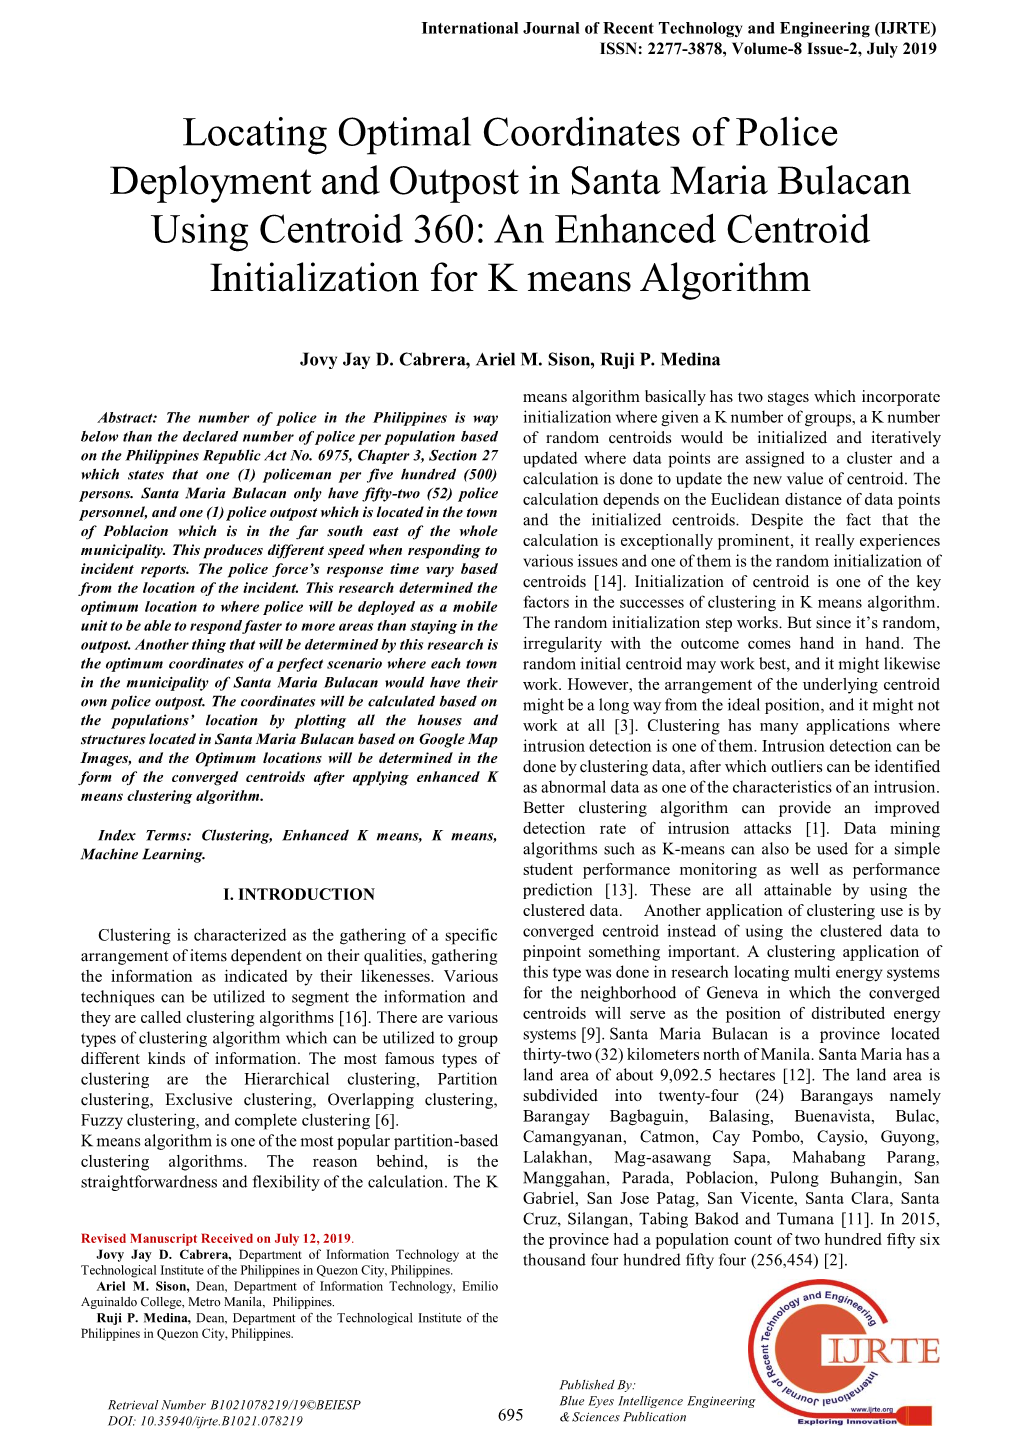 Locating Optimal Coordinates of Police Deployment and Outpost in Santa Maria Bulacan Using Centroid 360: an Enhanced Centroid Initialization for K Means Algorithm